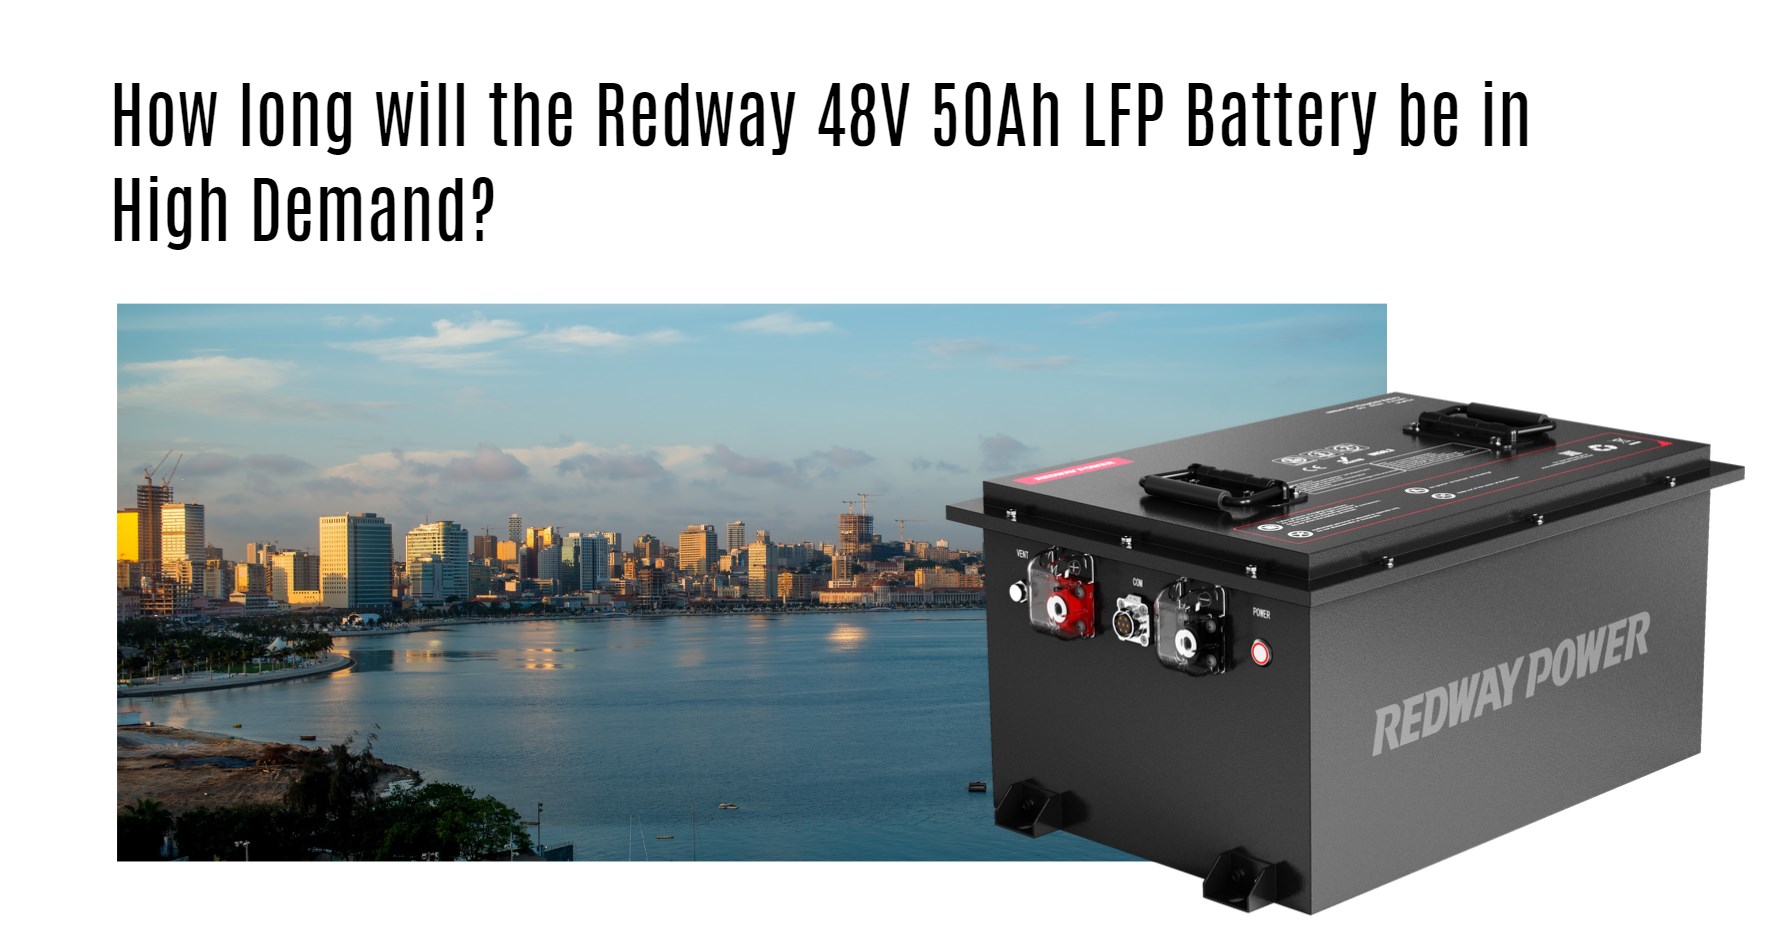 How long will the Redway 48V 50Ah LFP Battery be in High Demand?